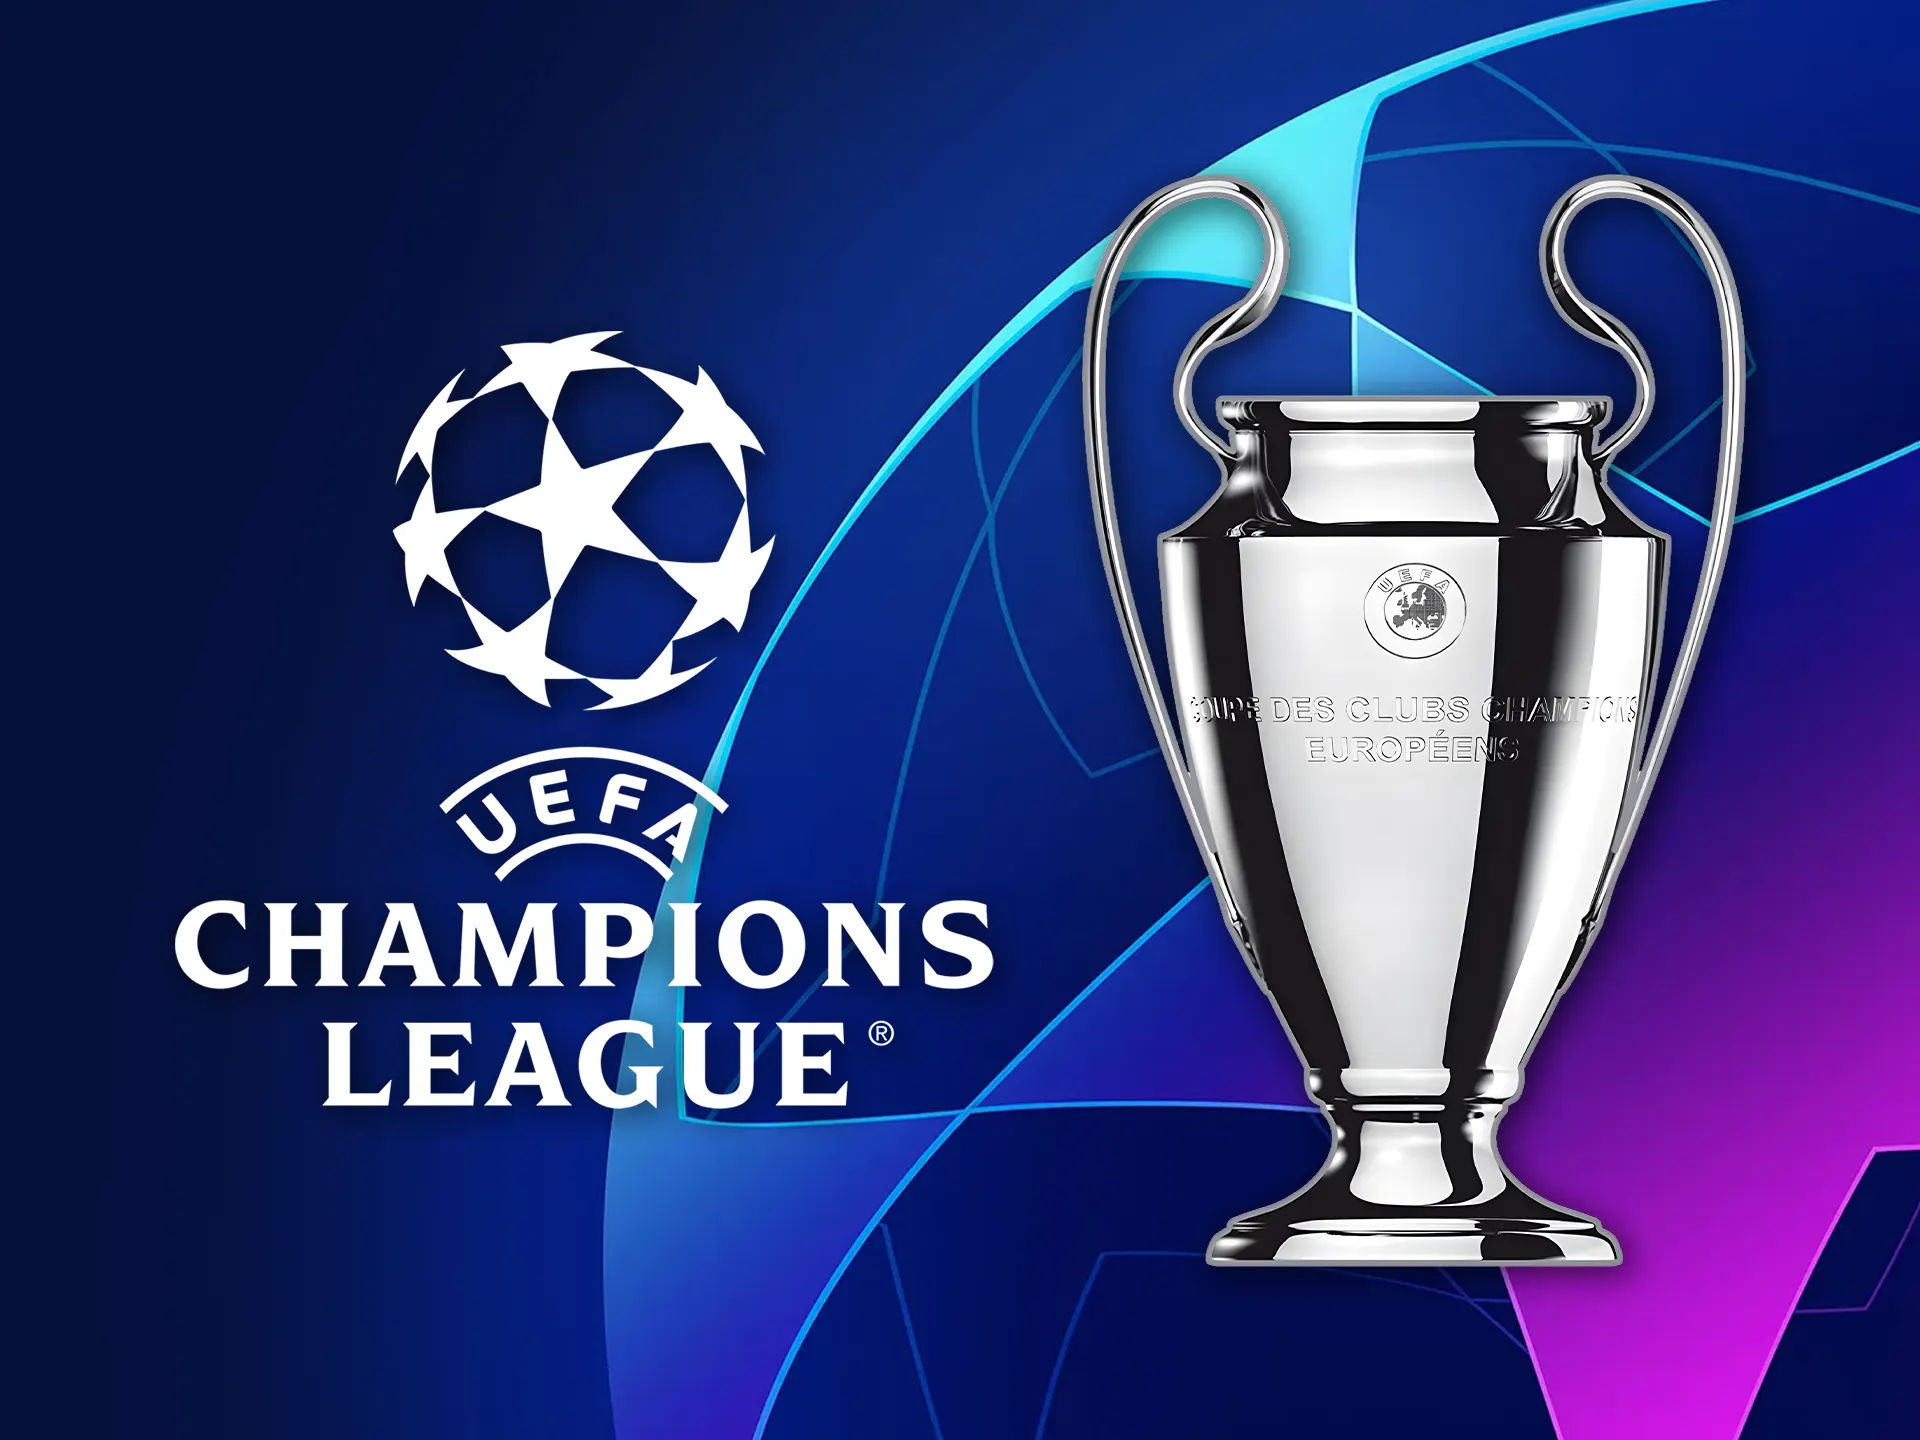 You can bet on football at the UEFA Champions League tournament.